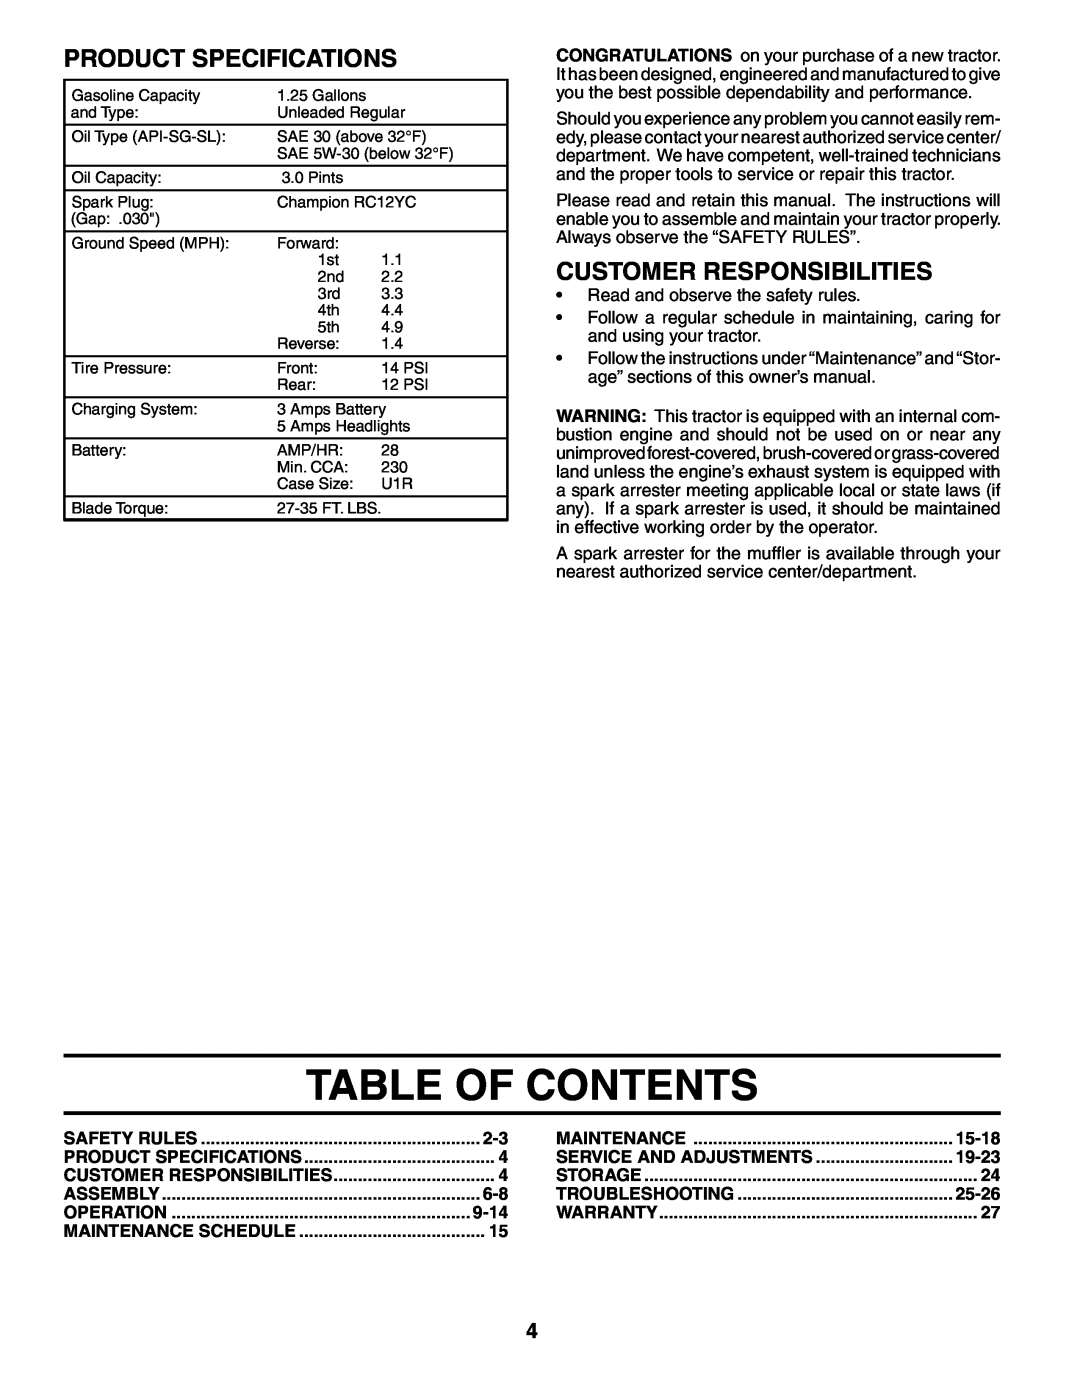 Weed Eater WE13538LT, 195013 manual Table Of Contents, Product Specifications, Customer Responsibilities 